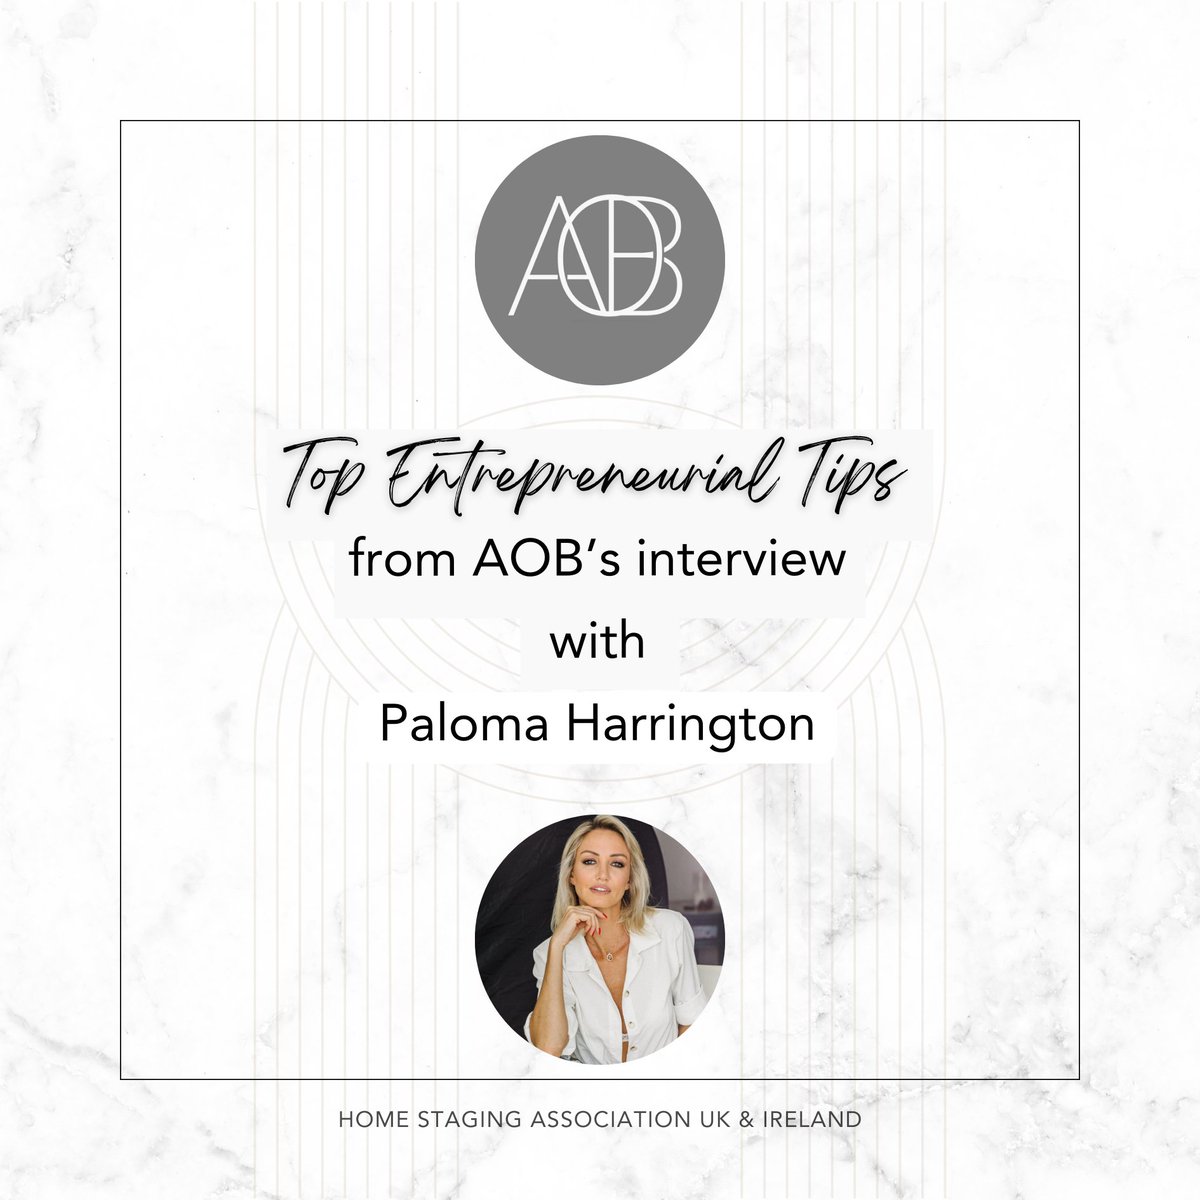 Want to learn @paloma.harrington’s top entrepreneurial tips? Read about those and more in her full interview with @aob_club by clicking here: zurl.co/R1RR  

Sign up here to join the AOB Club: zurl.co/35YQ 

#palomaharrington #businesssuccess #homestaginguk